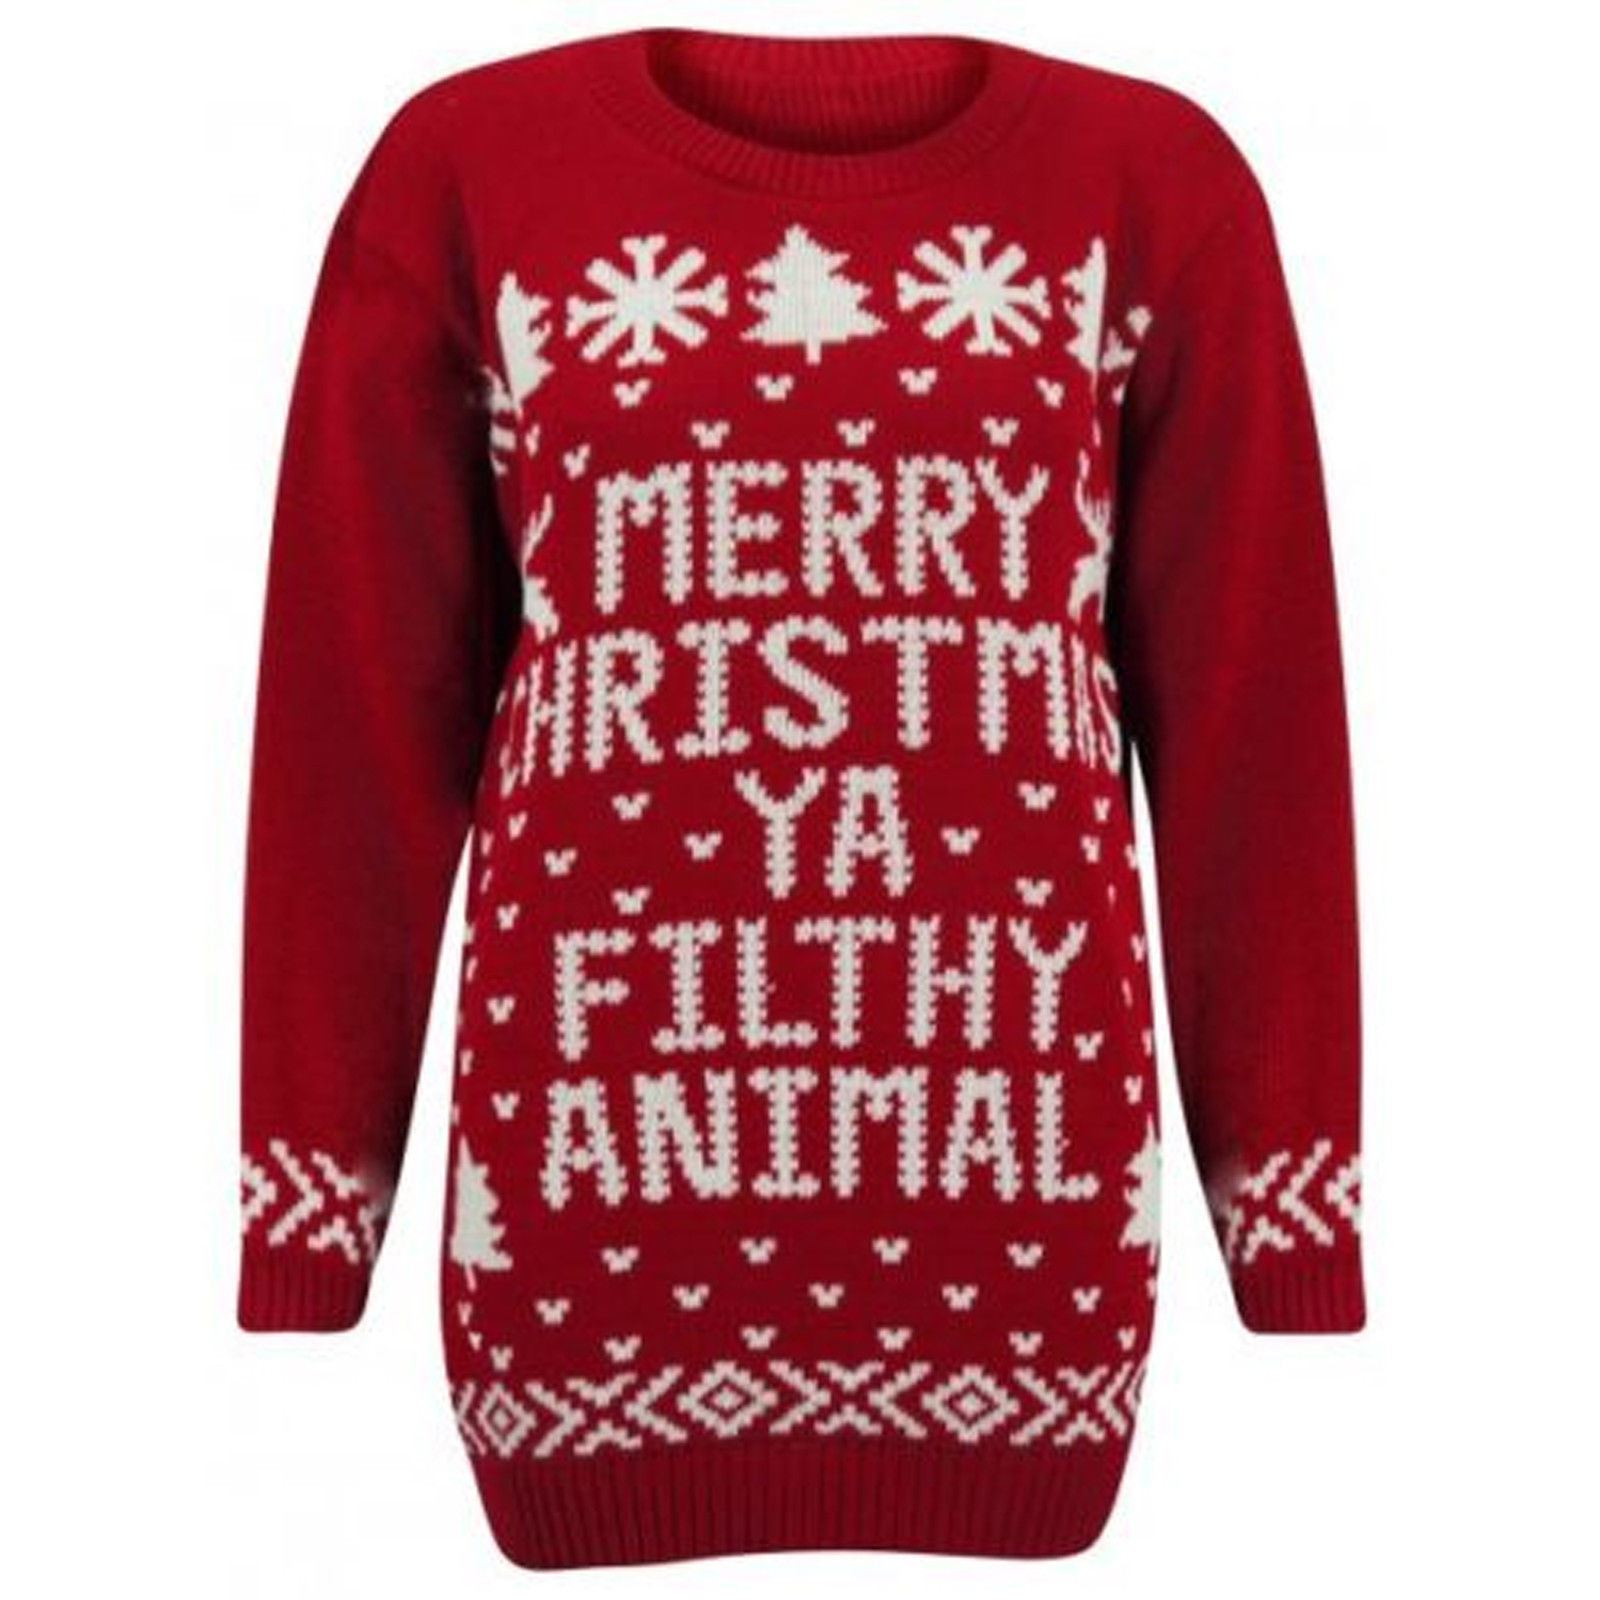 Retro Christmas Jumper Knitting Patterns Why Novelity Christmas Jumpers Are Necessary Part Of Christmas